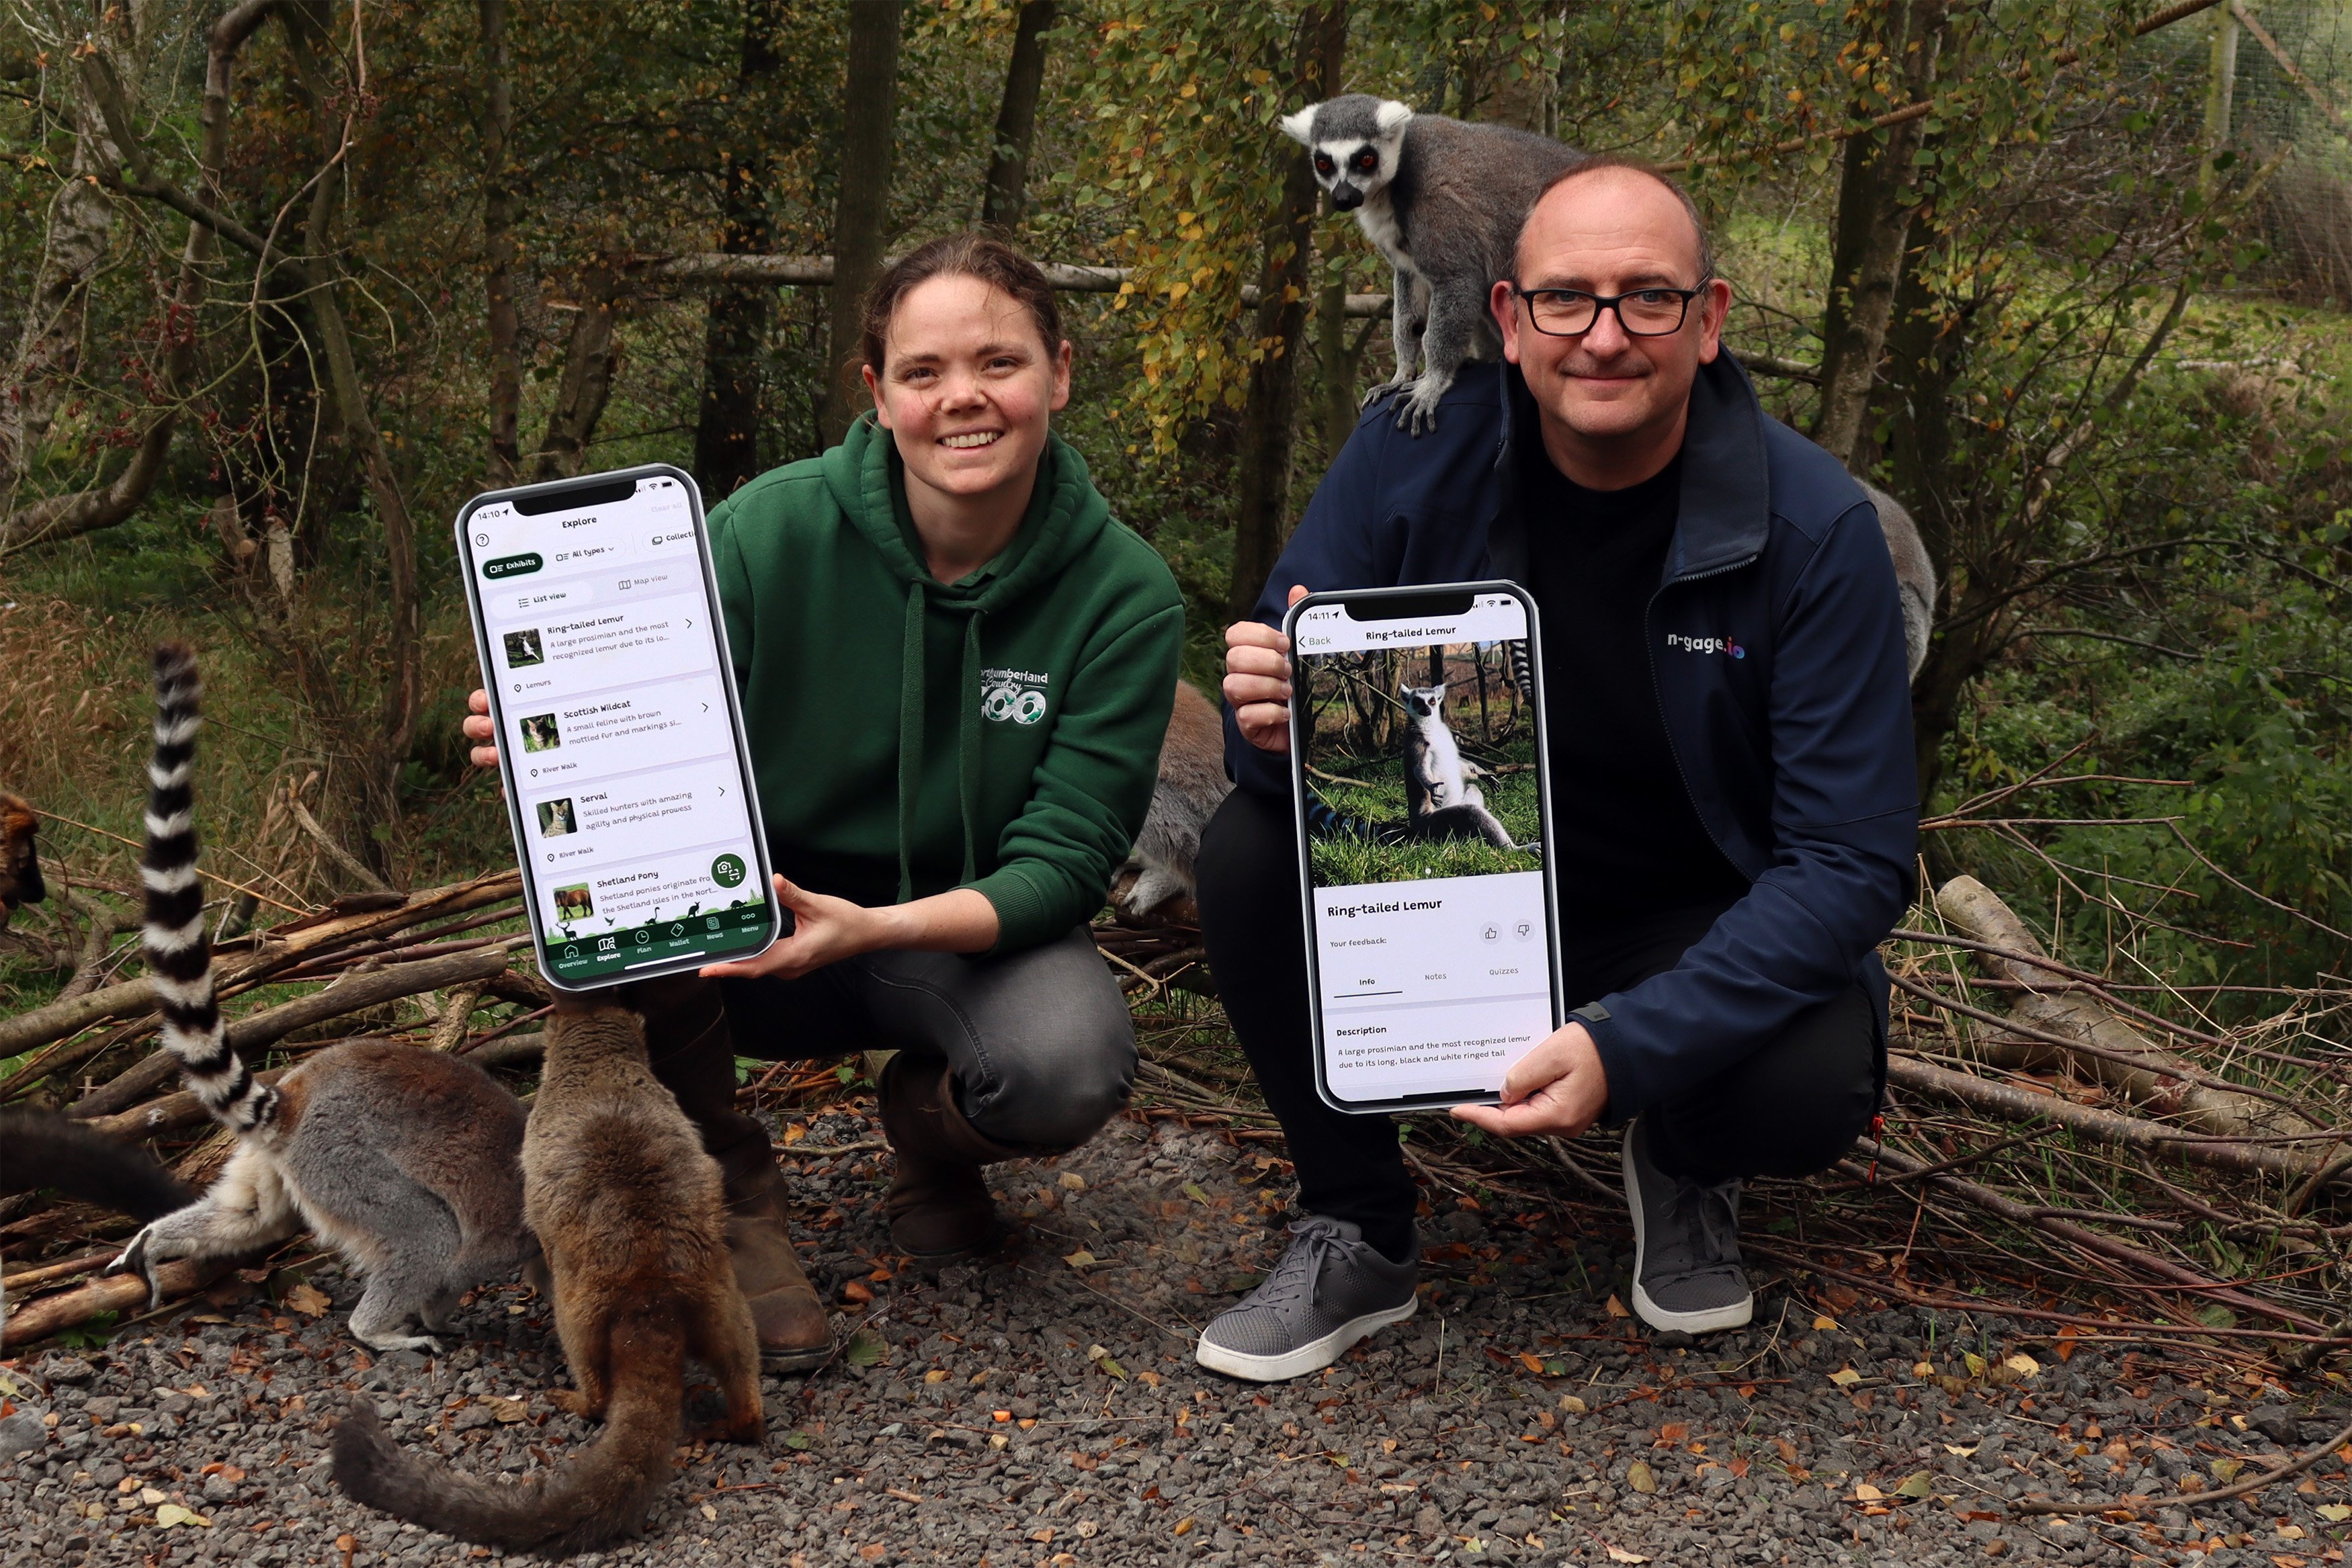 n-gage.io founder Bryan Hoare at Northumberland Zoo with Lemurs